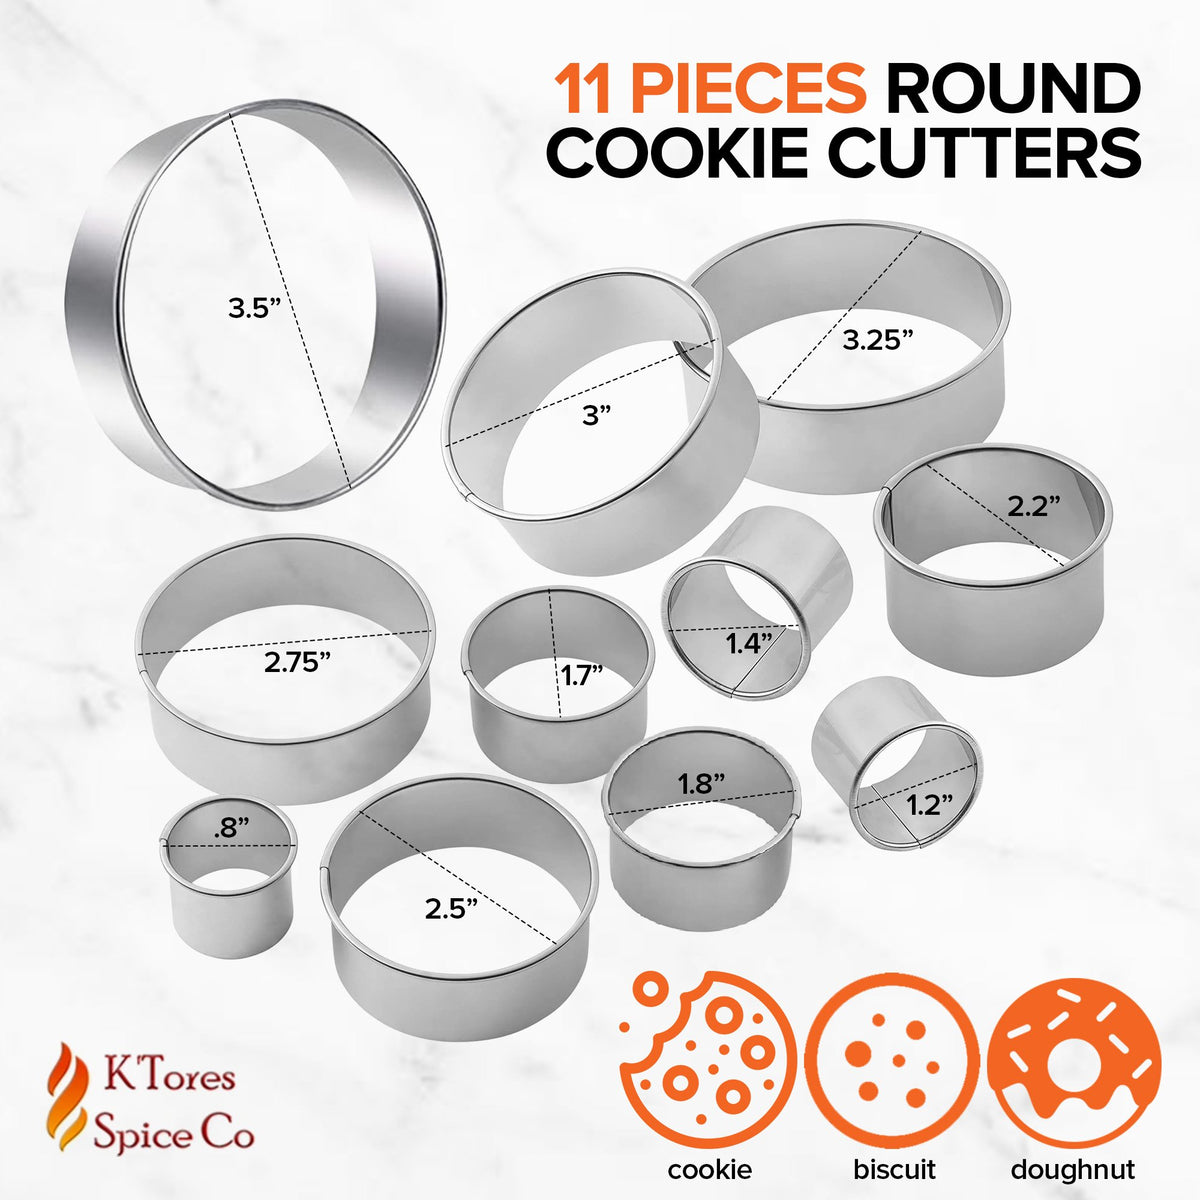 K-Tores Stainless Steel, Round - Cookie Cutters Baking Pastry Cutter Set - Strong Circle Biscuit, Cookie Cutter Set - 11 Cookie Cutter Sizes & Shapes -